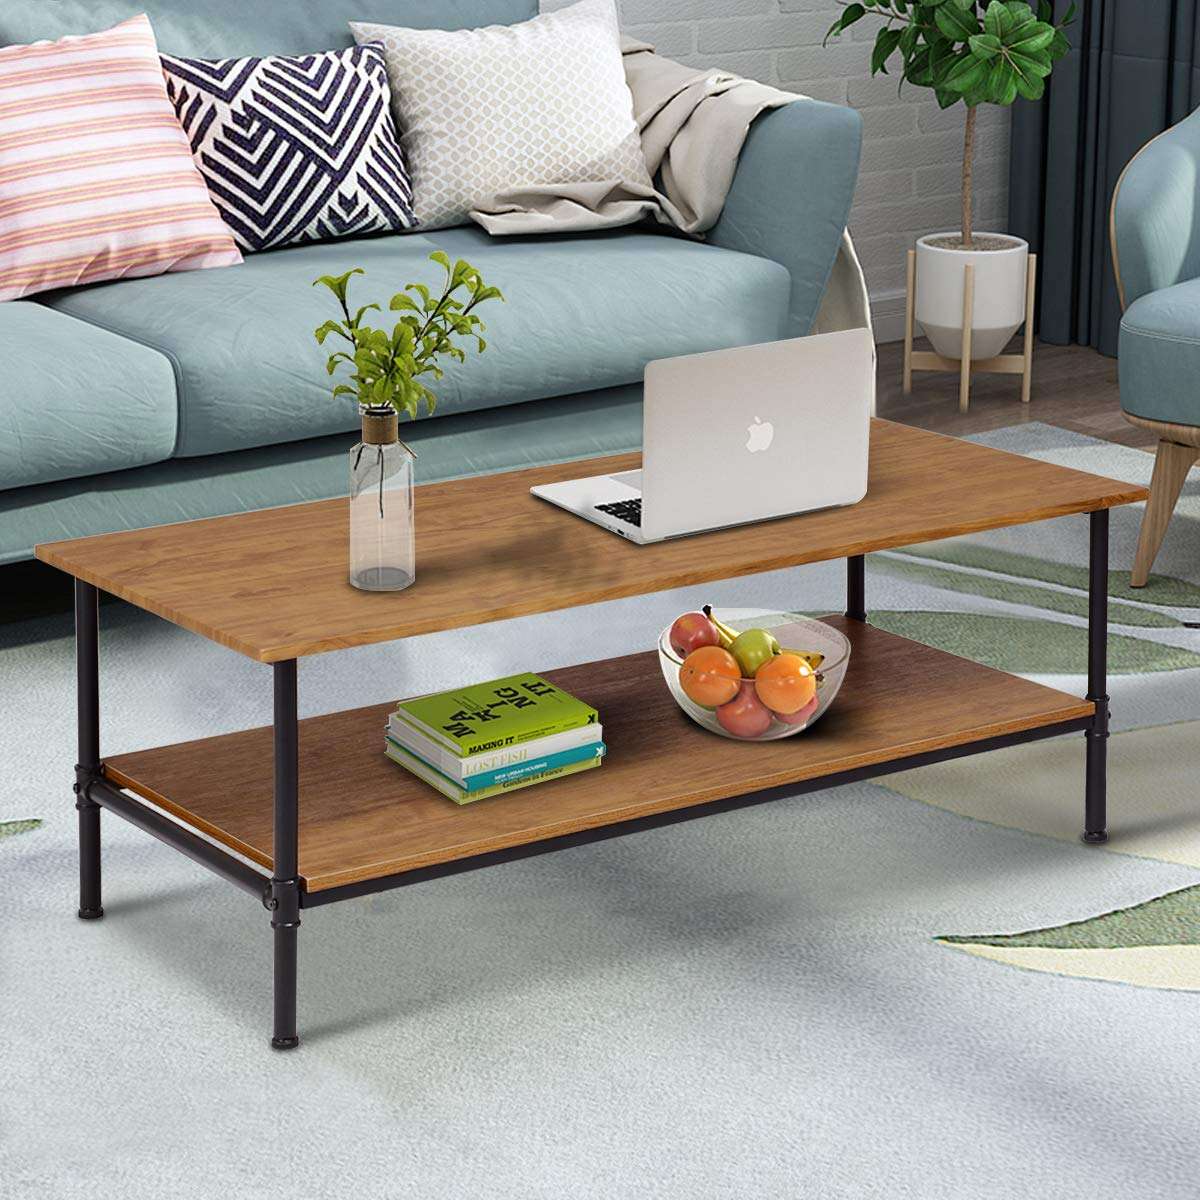 40 Incredibly Cheap Coffee Tables You Can Buy for Under ...